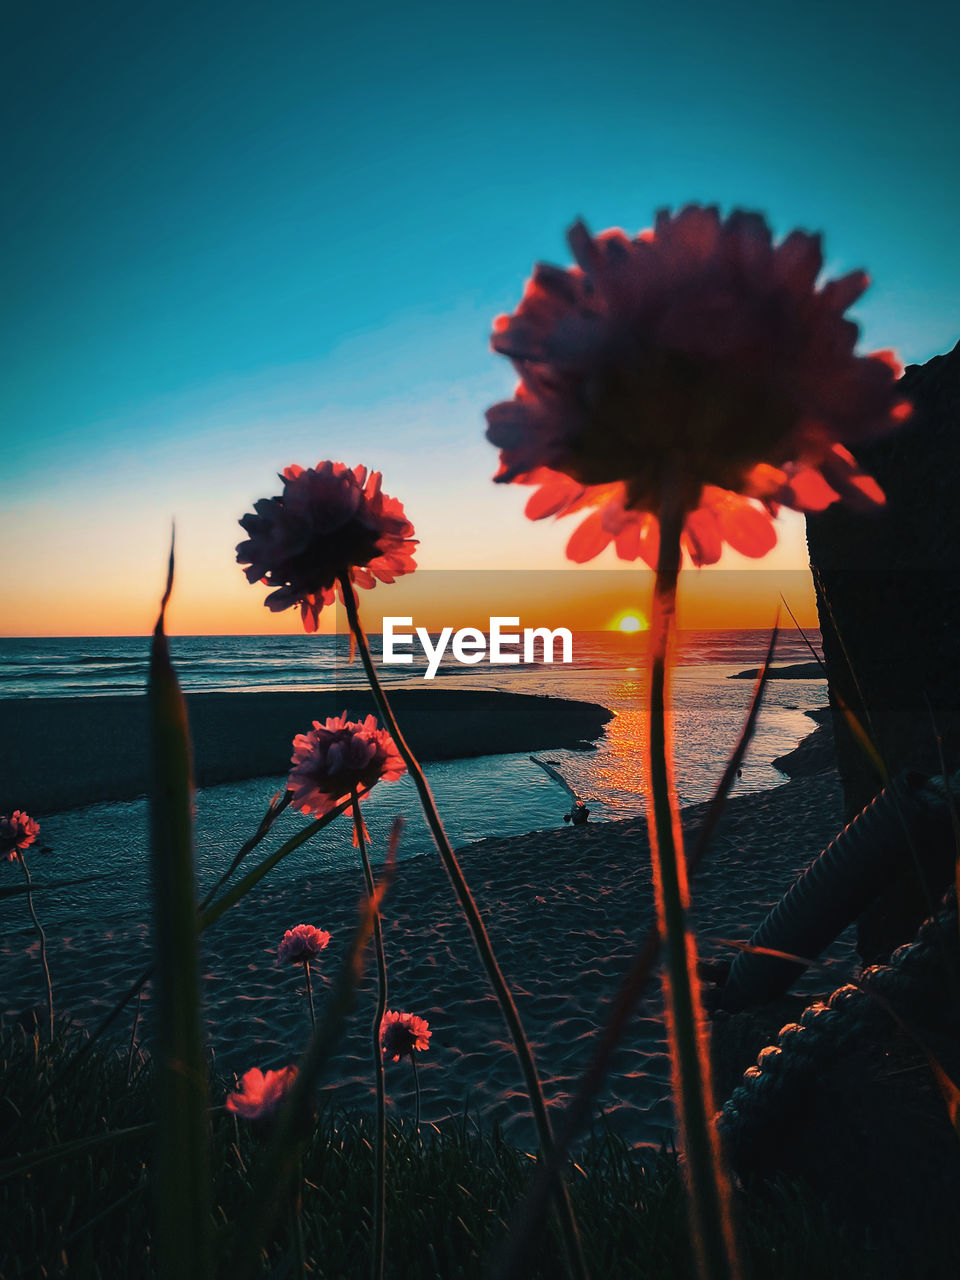 plant, beauty in nature, sky, nature, flower, flowering plant, sunset, water, sea, land, red, freshness, tranquility, sunlight, no people, reflection, scenics - nature, beach, tranquil scene, outdoors, horizon, growth, cloud, evening, dusk, flower head, horizon over water, fragility, blue, summer